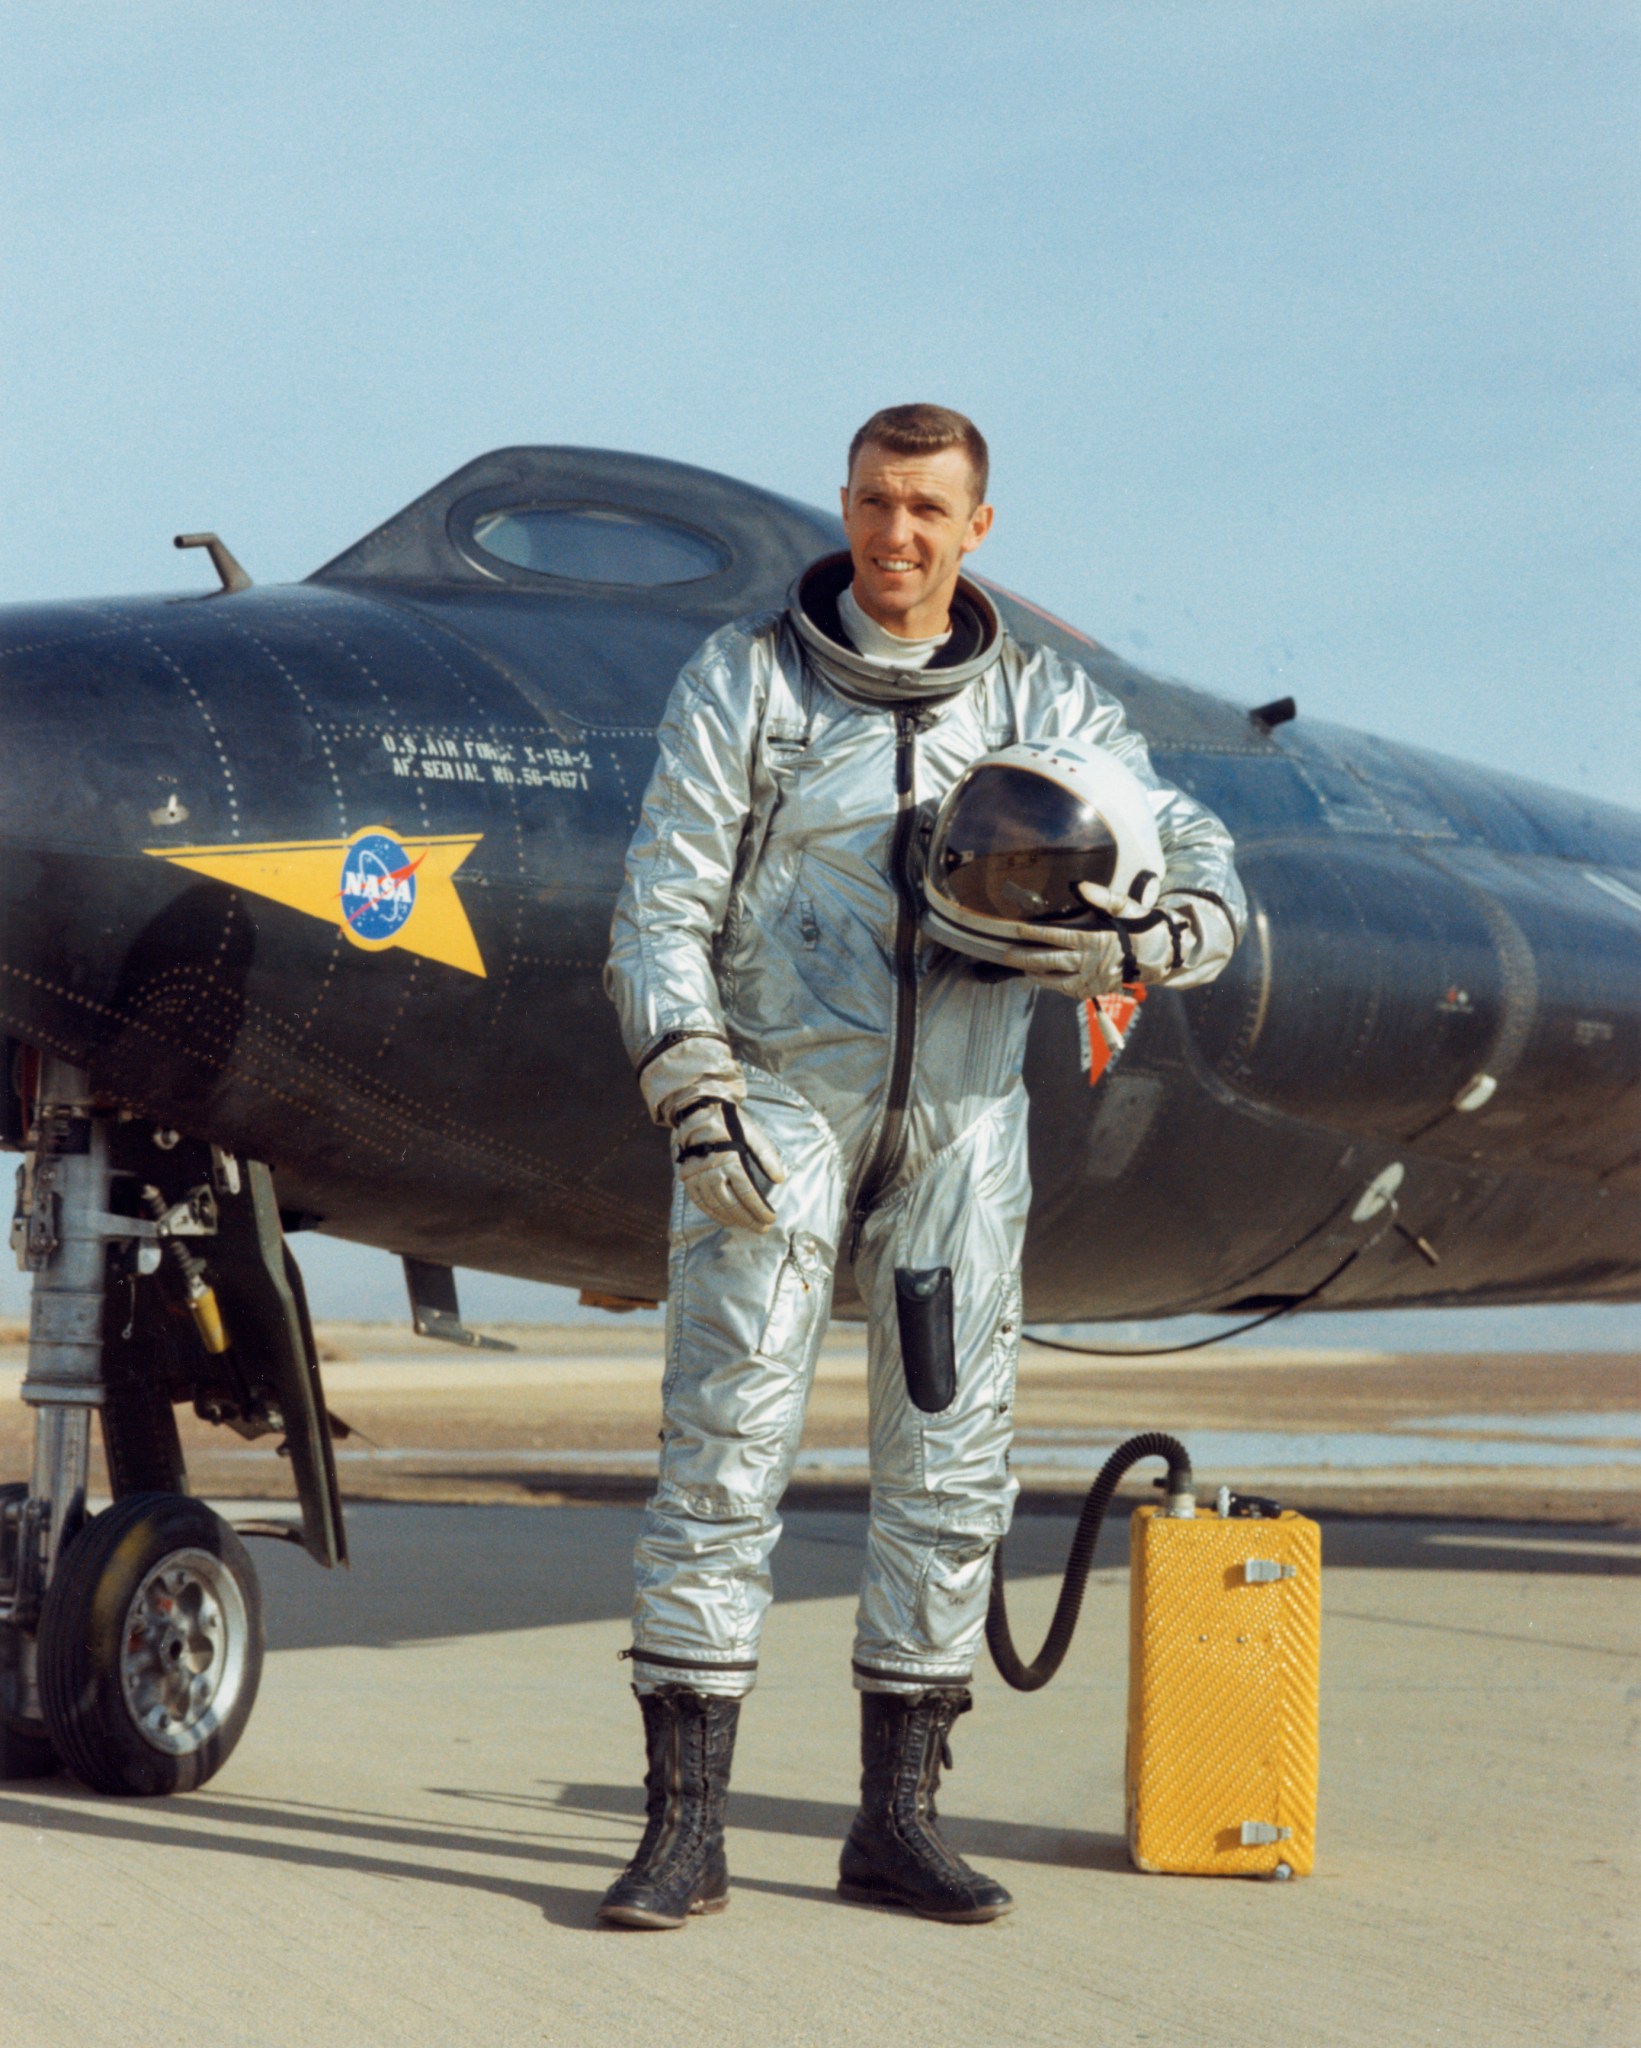 Joe Engle holding his helmet standing in front of the X-15 aircraft.